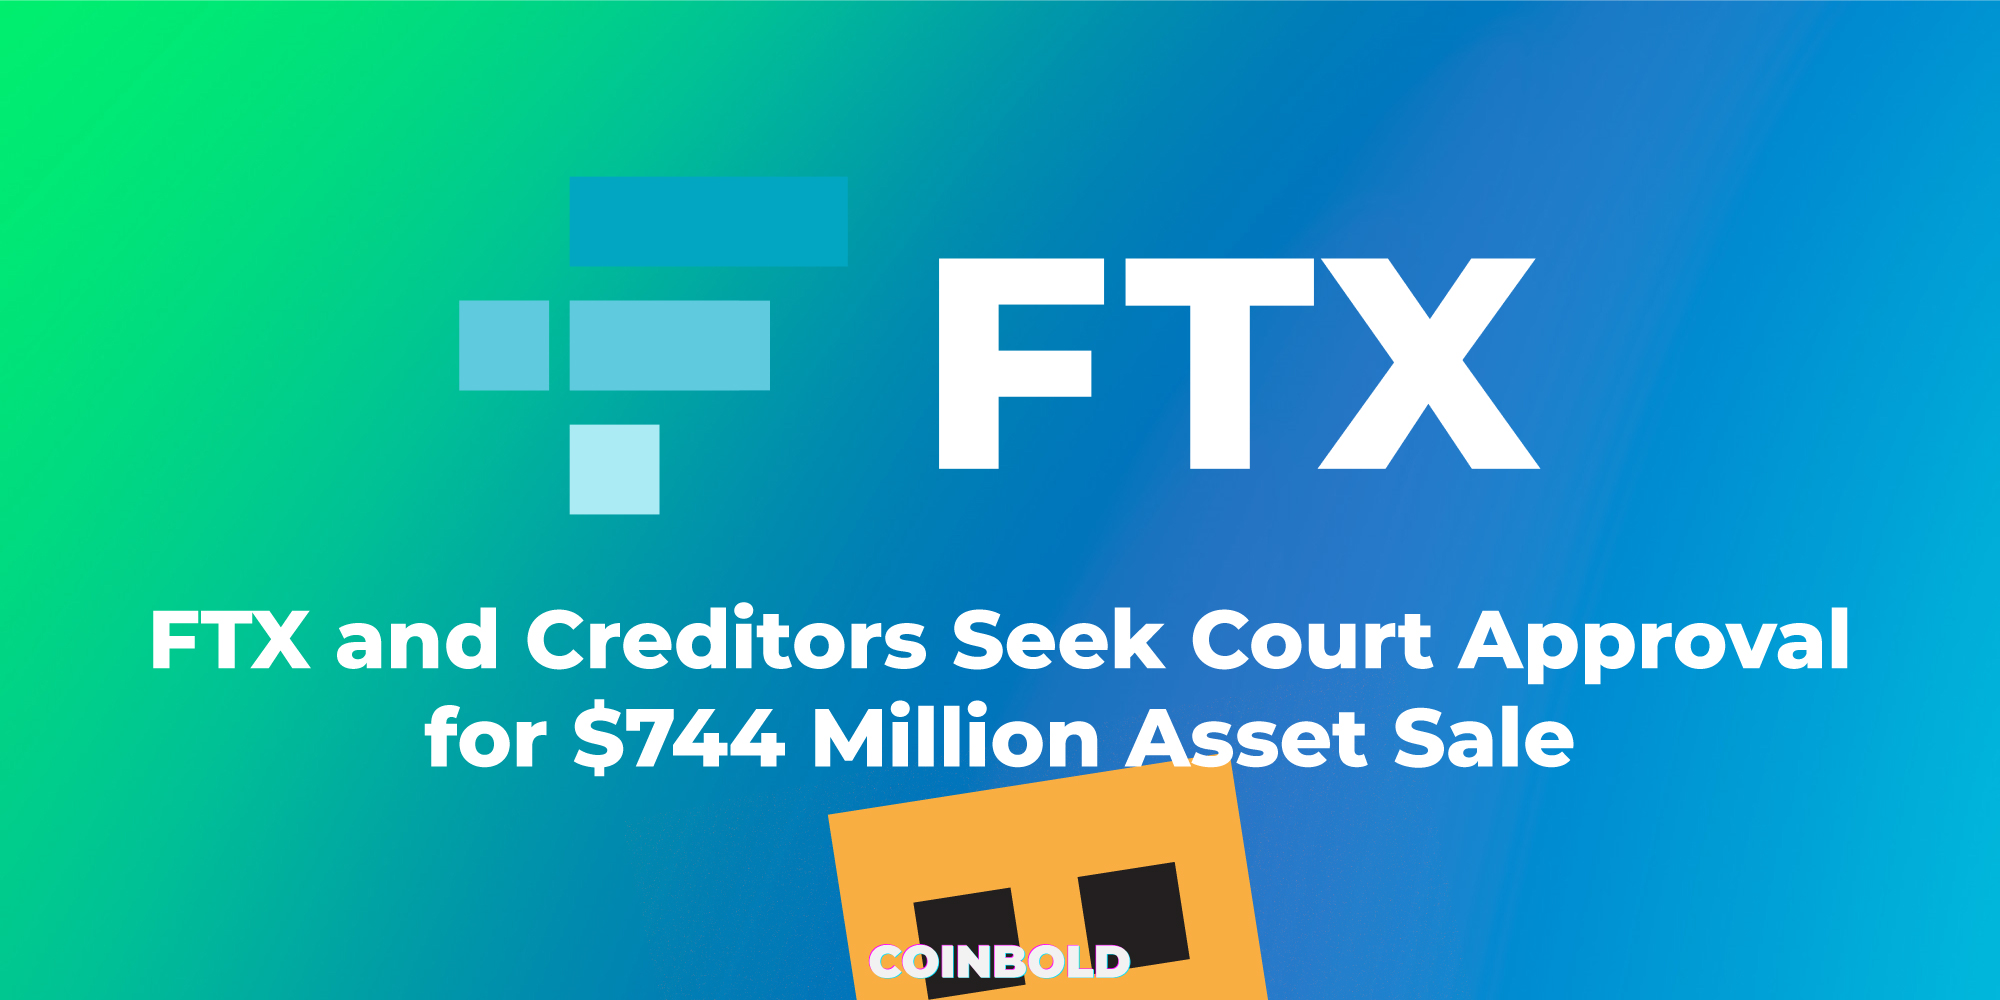 FTX and Creditors Seek Court Approval for $744 Million Asset Sale